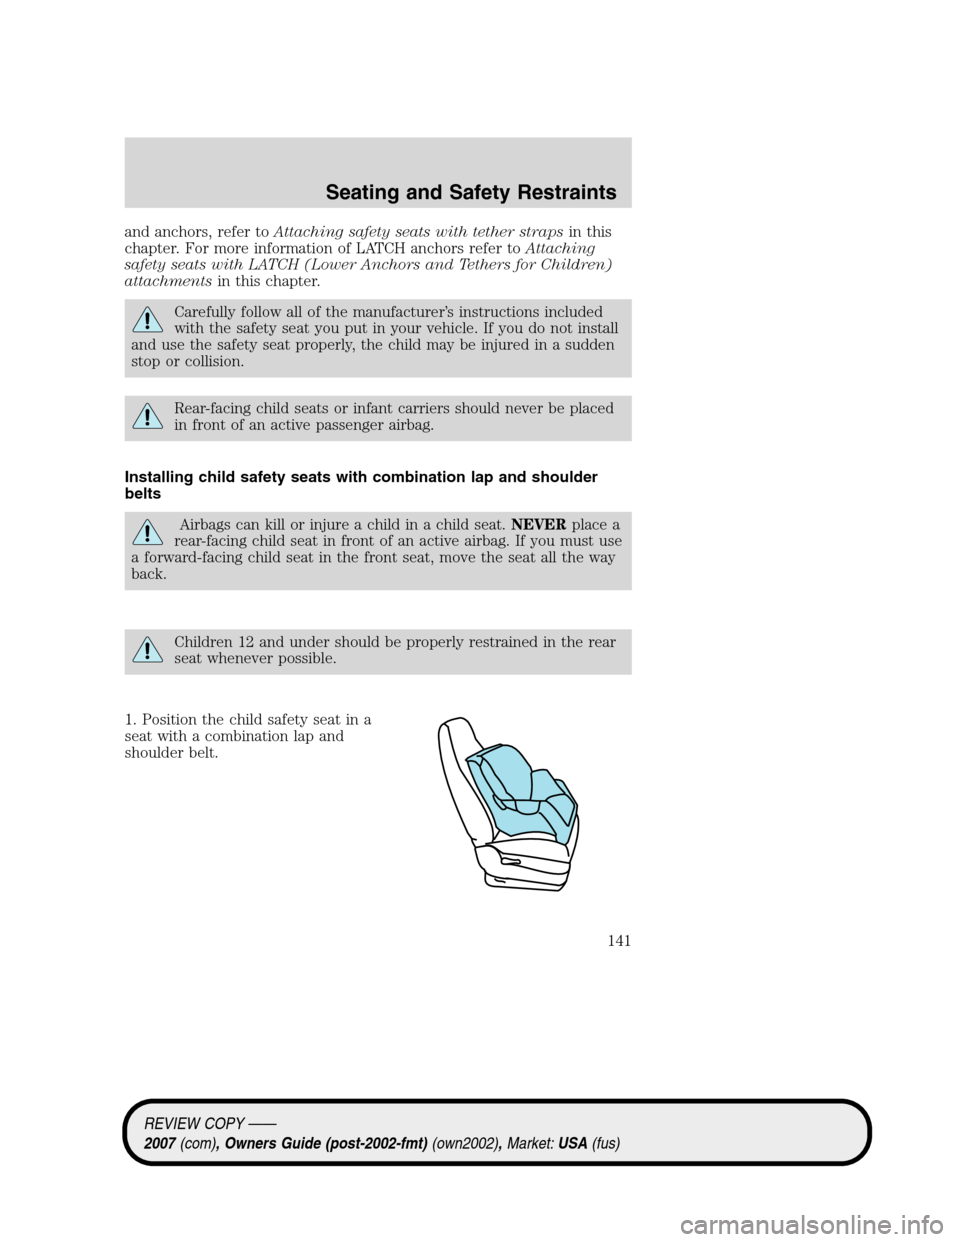 LINCOLN MKZ 2007 Owners Manual and anchors, refer toAttaching safety seats with tether strapsin this
chapter. For more information of LATCH anchors refer toAttaching
safety seats with LATCH (Lower Anchors and Tethers for Children)
